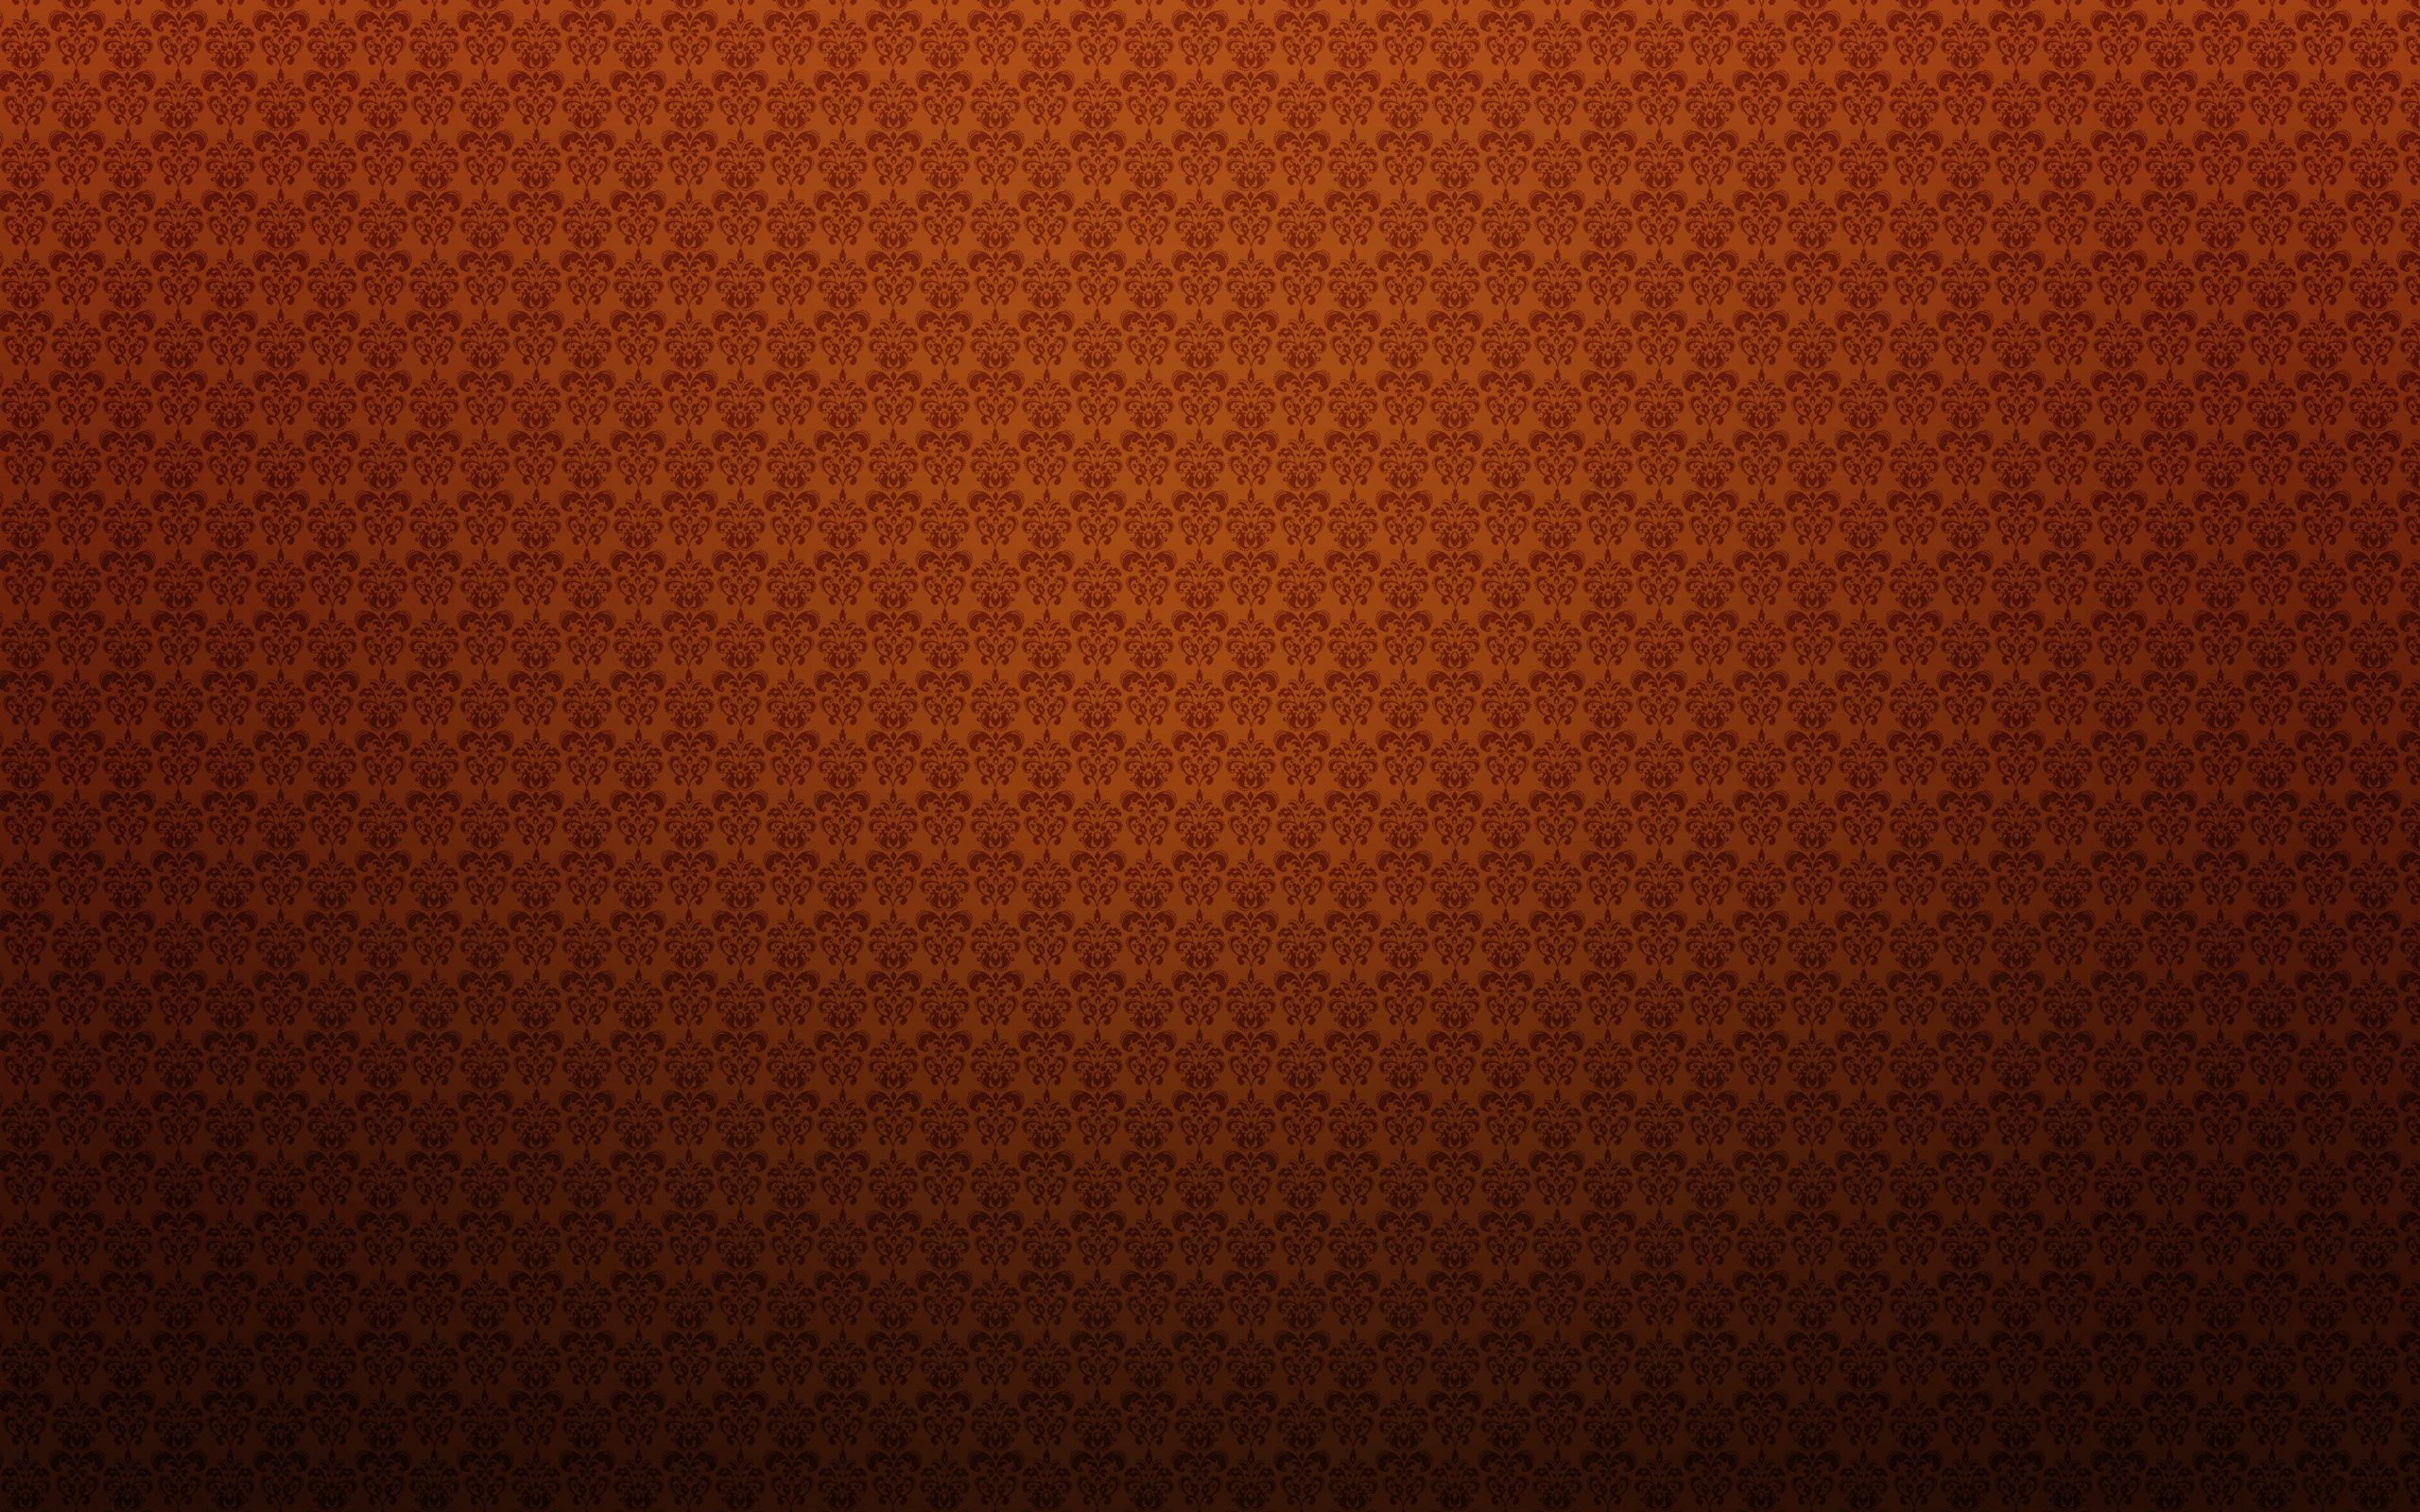 textures, light coloured, background, texture Hd 1080p Mobile